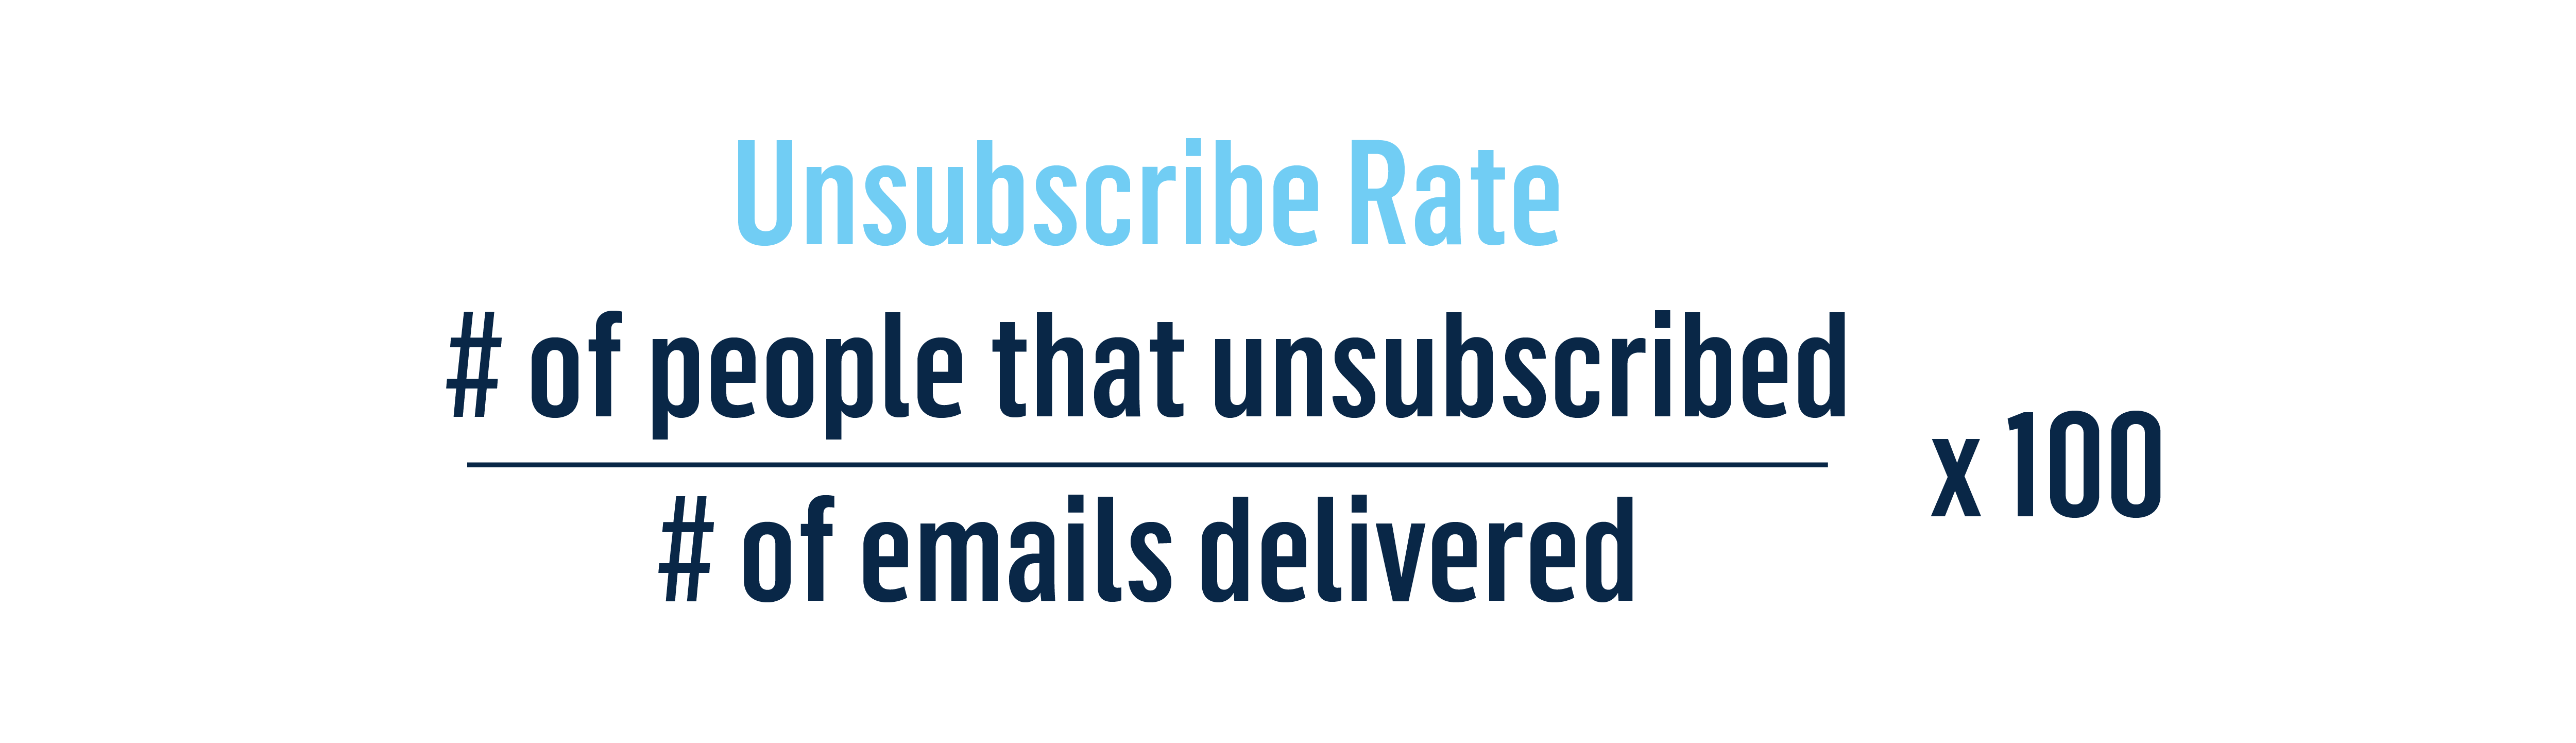 # of people that unsubscribed / # of emails delivered X 100